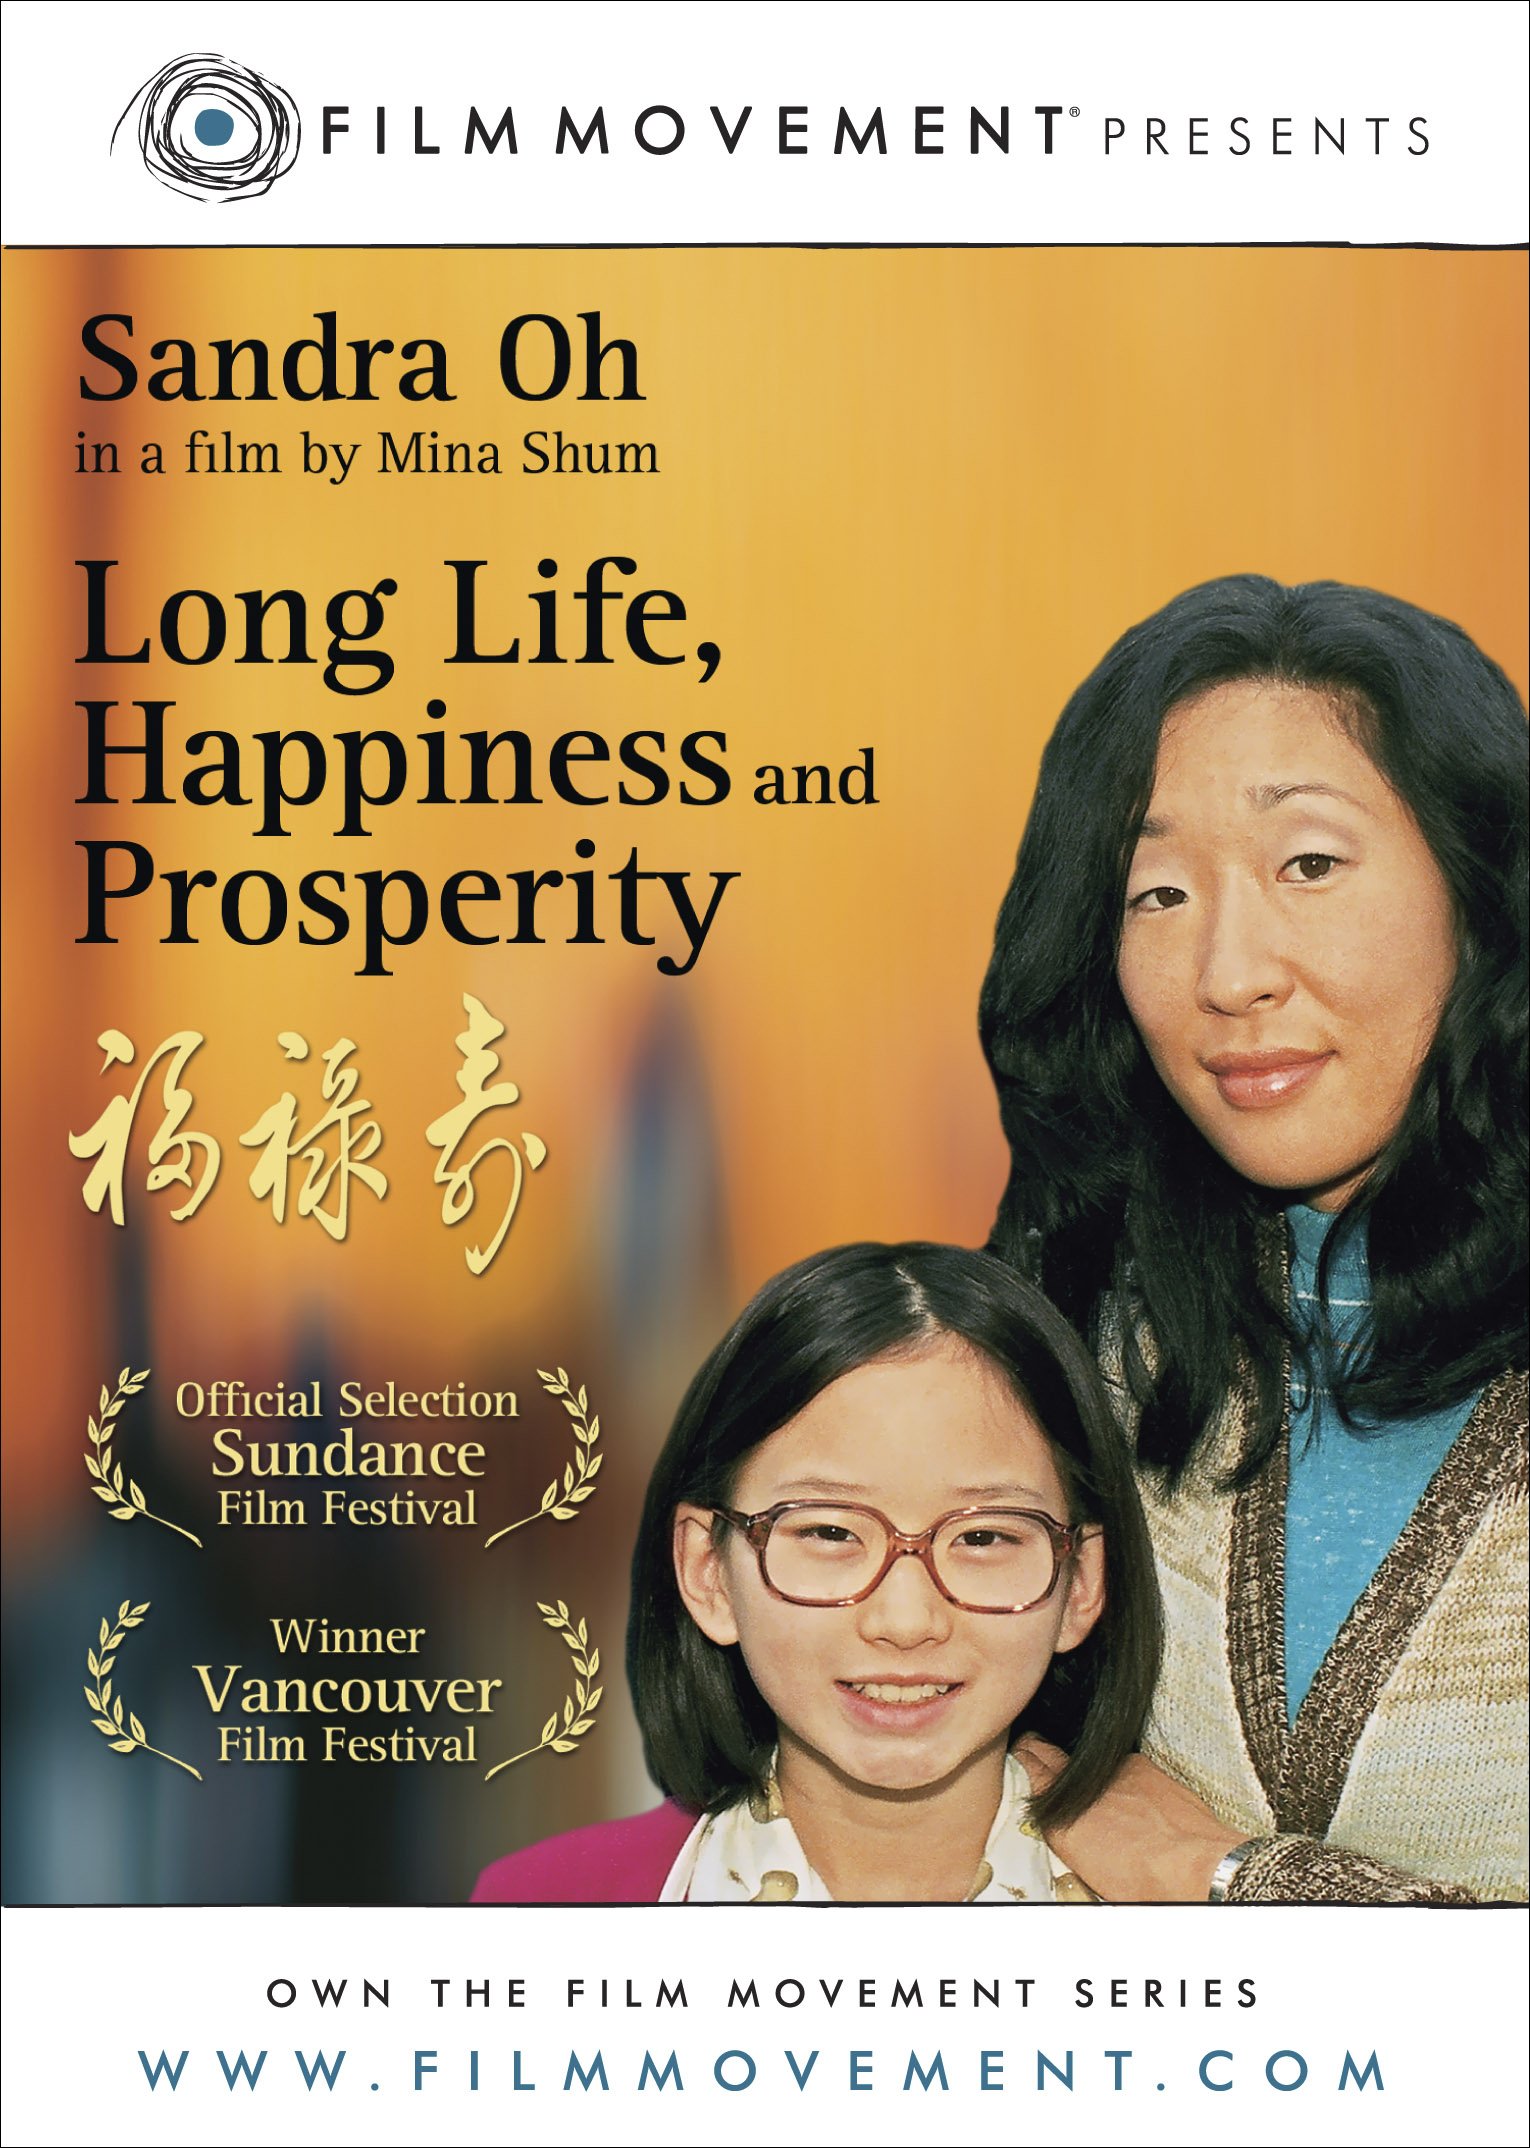 L'affiche du film Long Life, Happiness and Prosperity